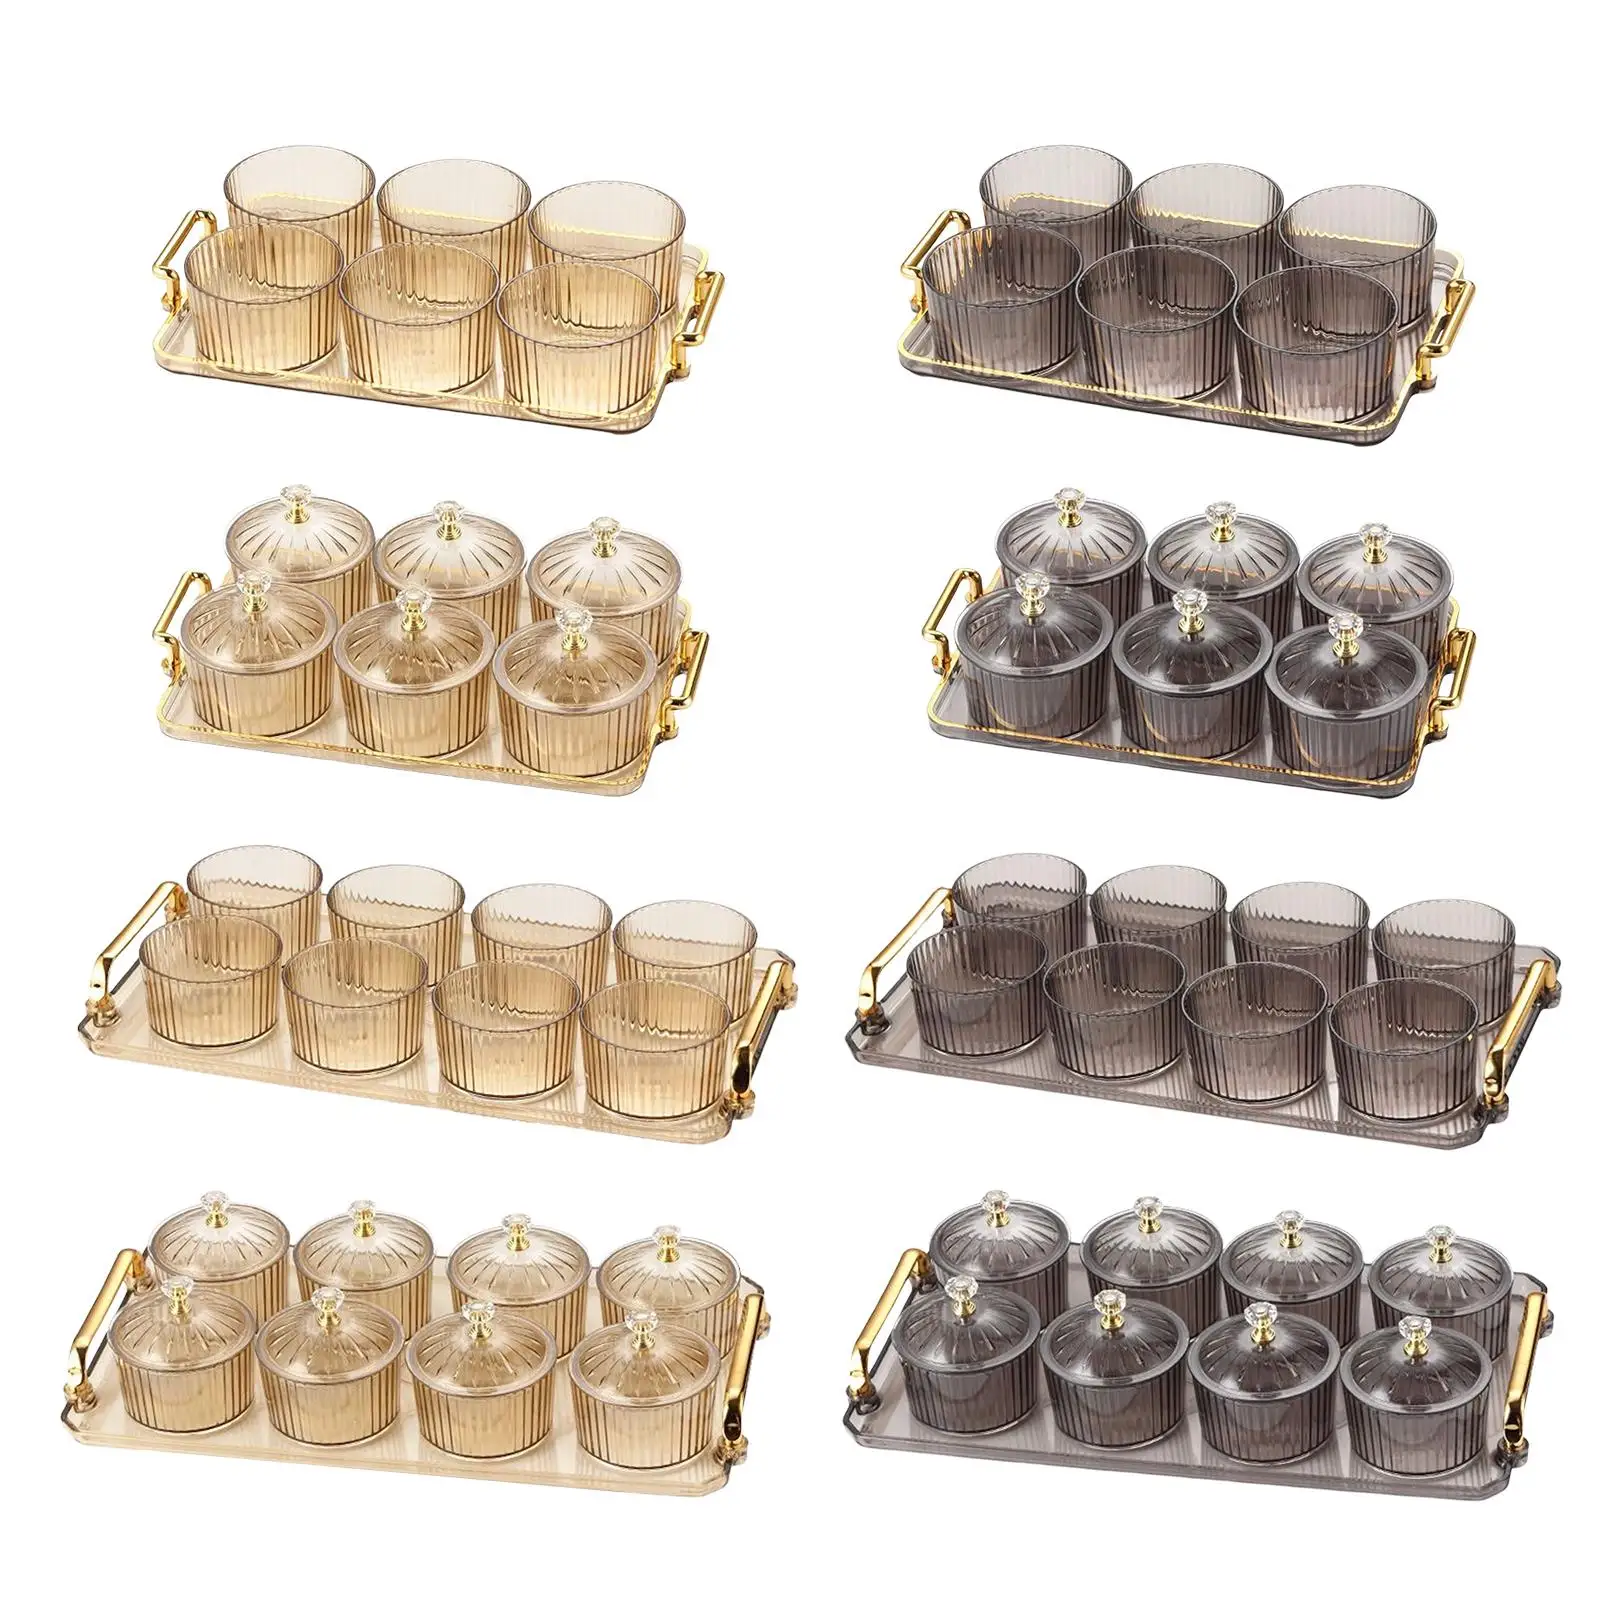 Fruit Serving Platter Condiment Tray with Holder for Wedding, Party Easy to Refill Serving Dishes Dessert Dividing Plate